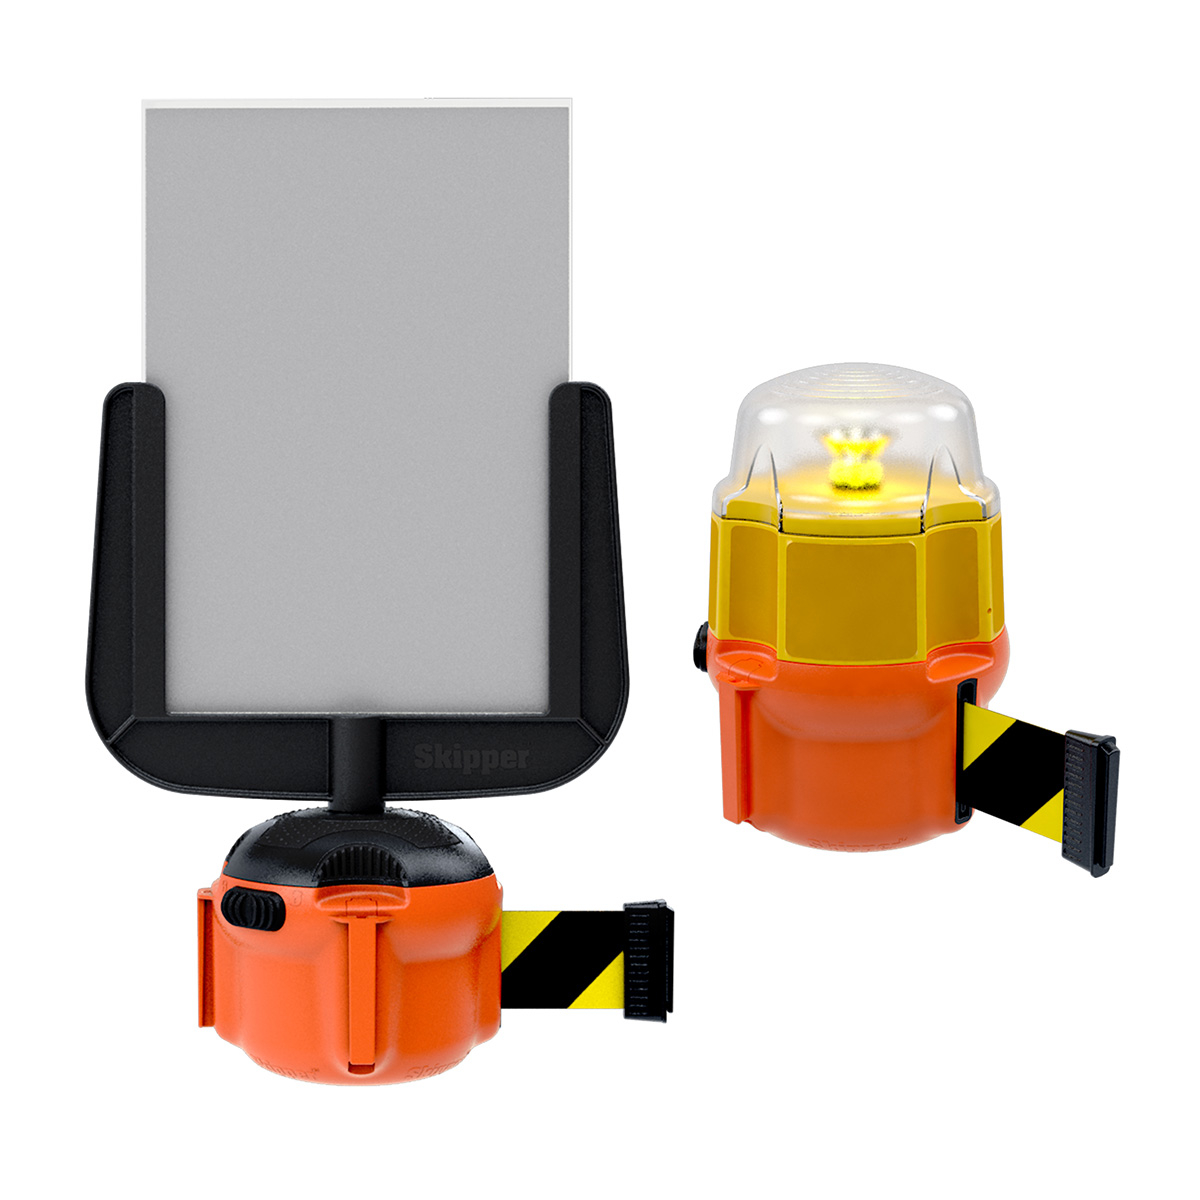 Skipper XS Retractable Belt Barrier is Compatible With A4 Sign Holder And Safety Light